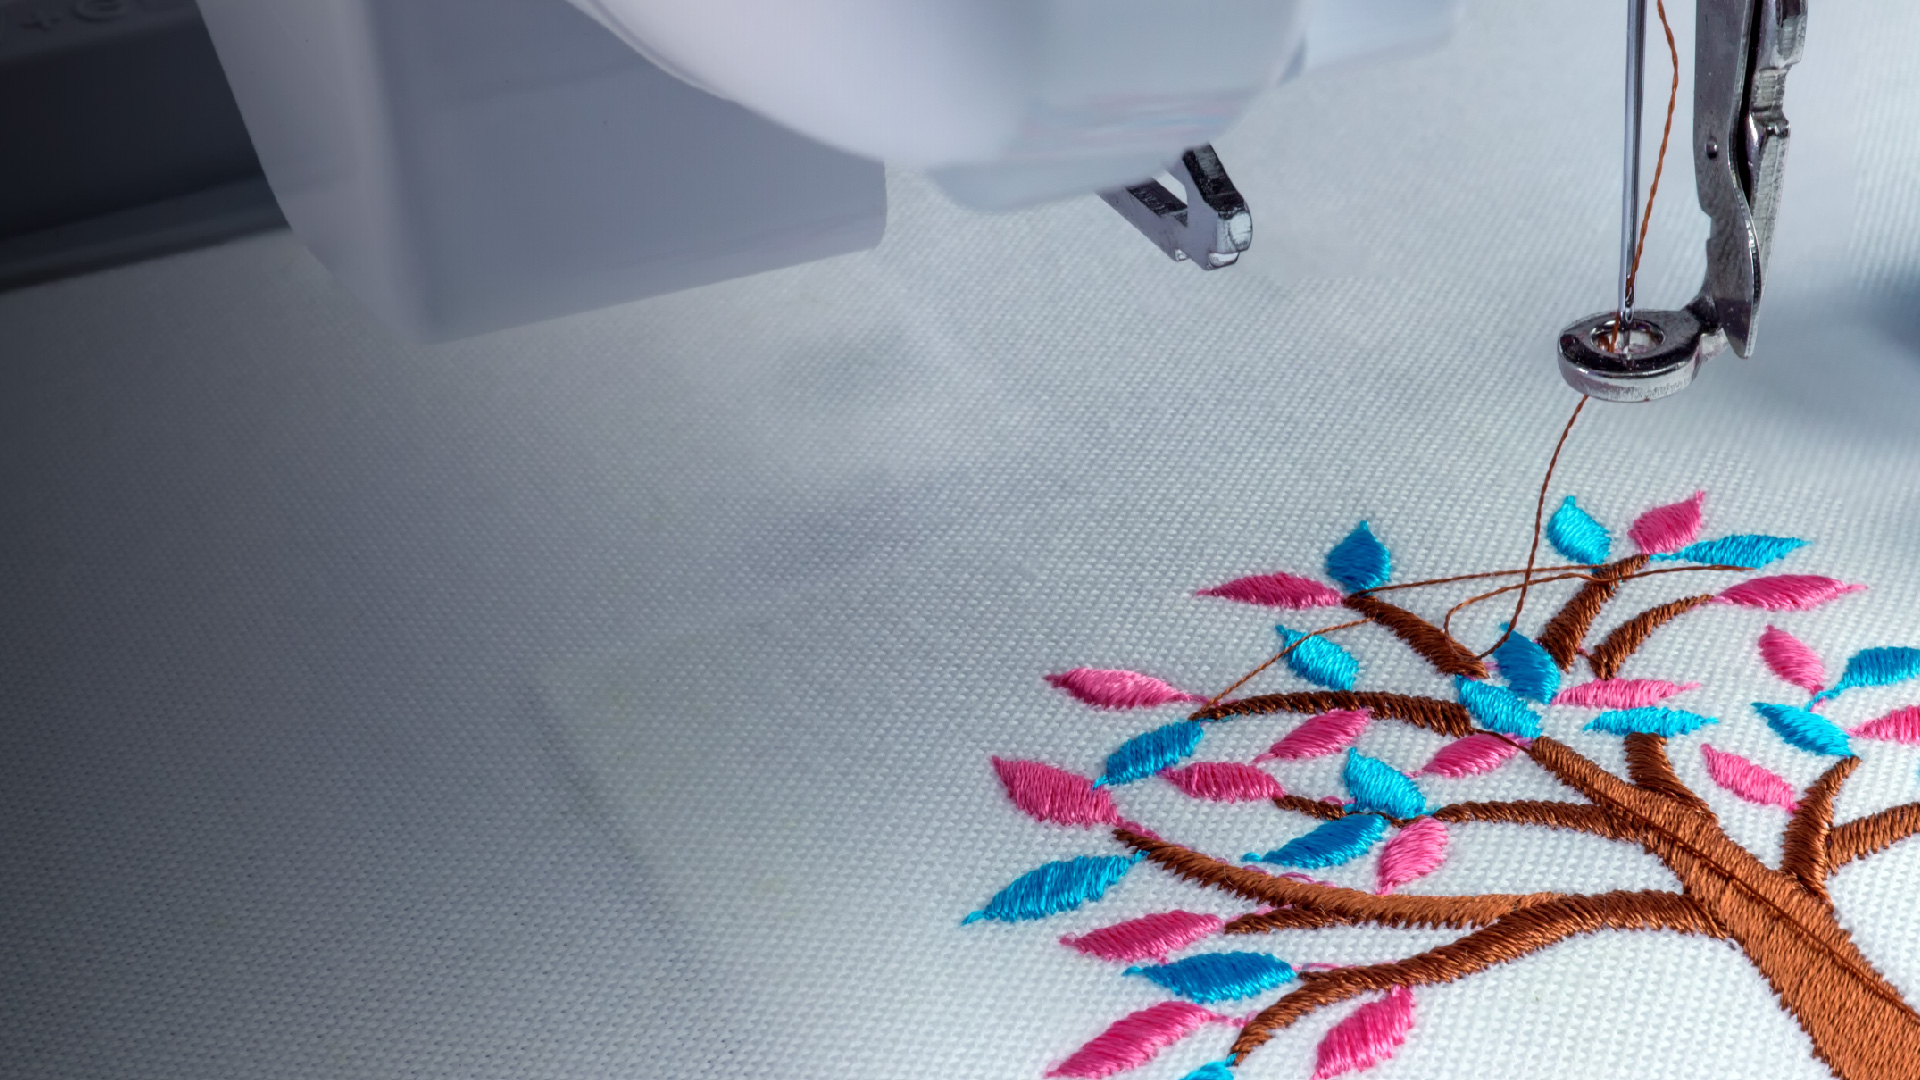 Learn to Sew - Hooked on Sewing